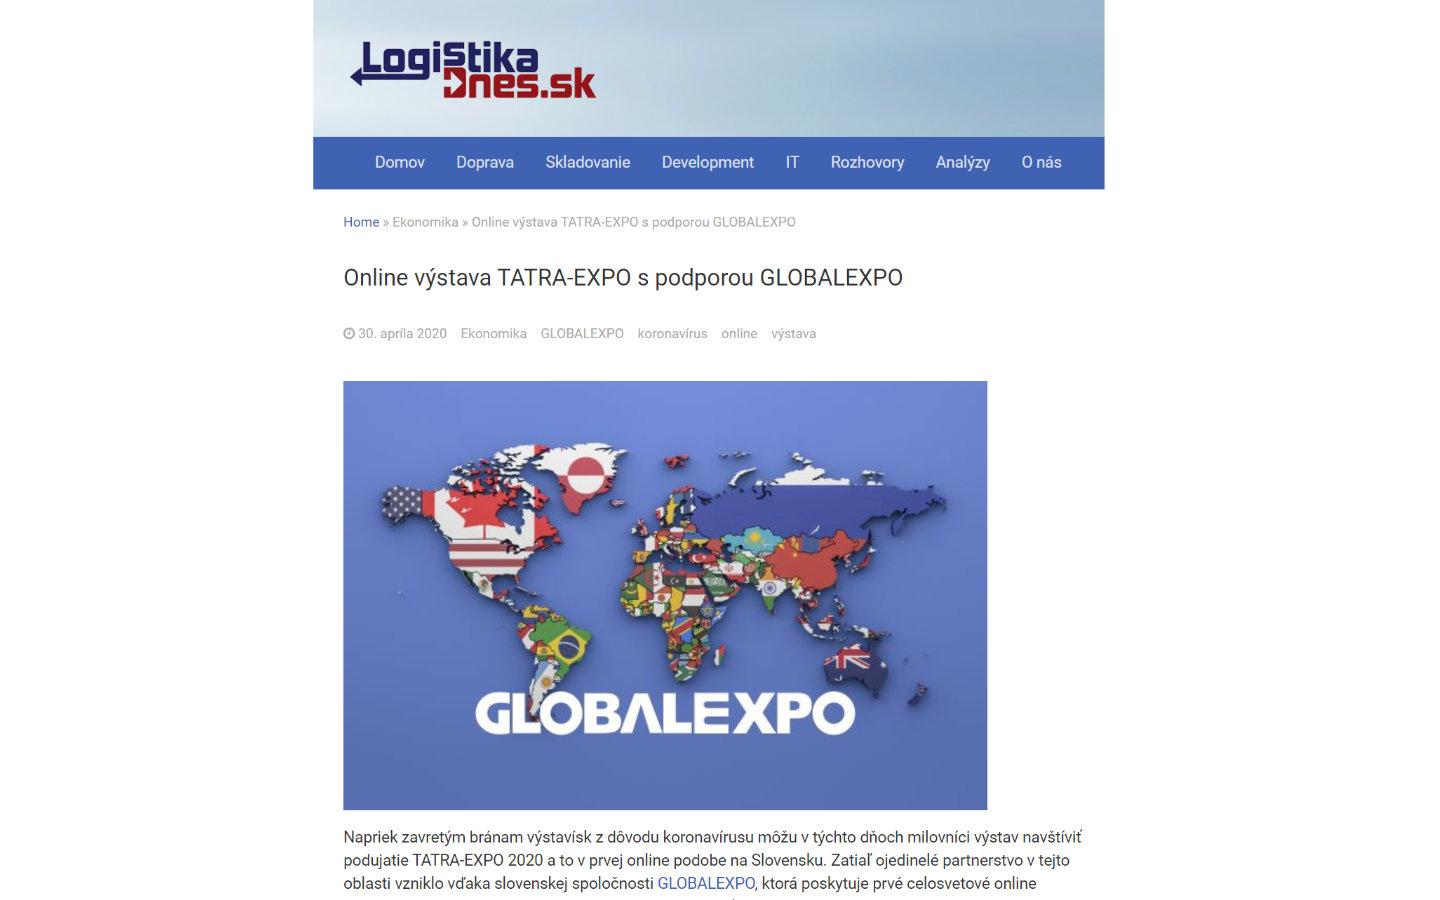 TATRA-EXPO online exhibition with GLOBALEXPO support